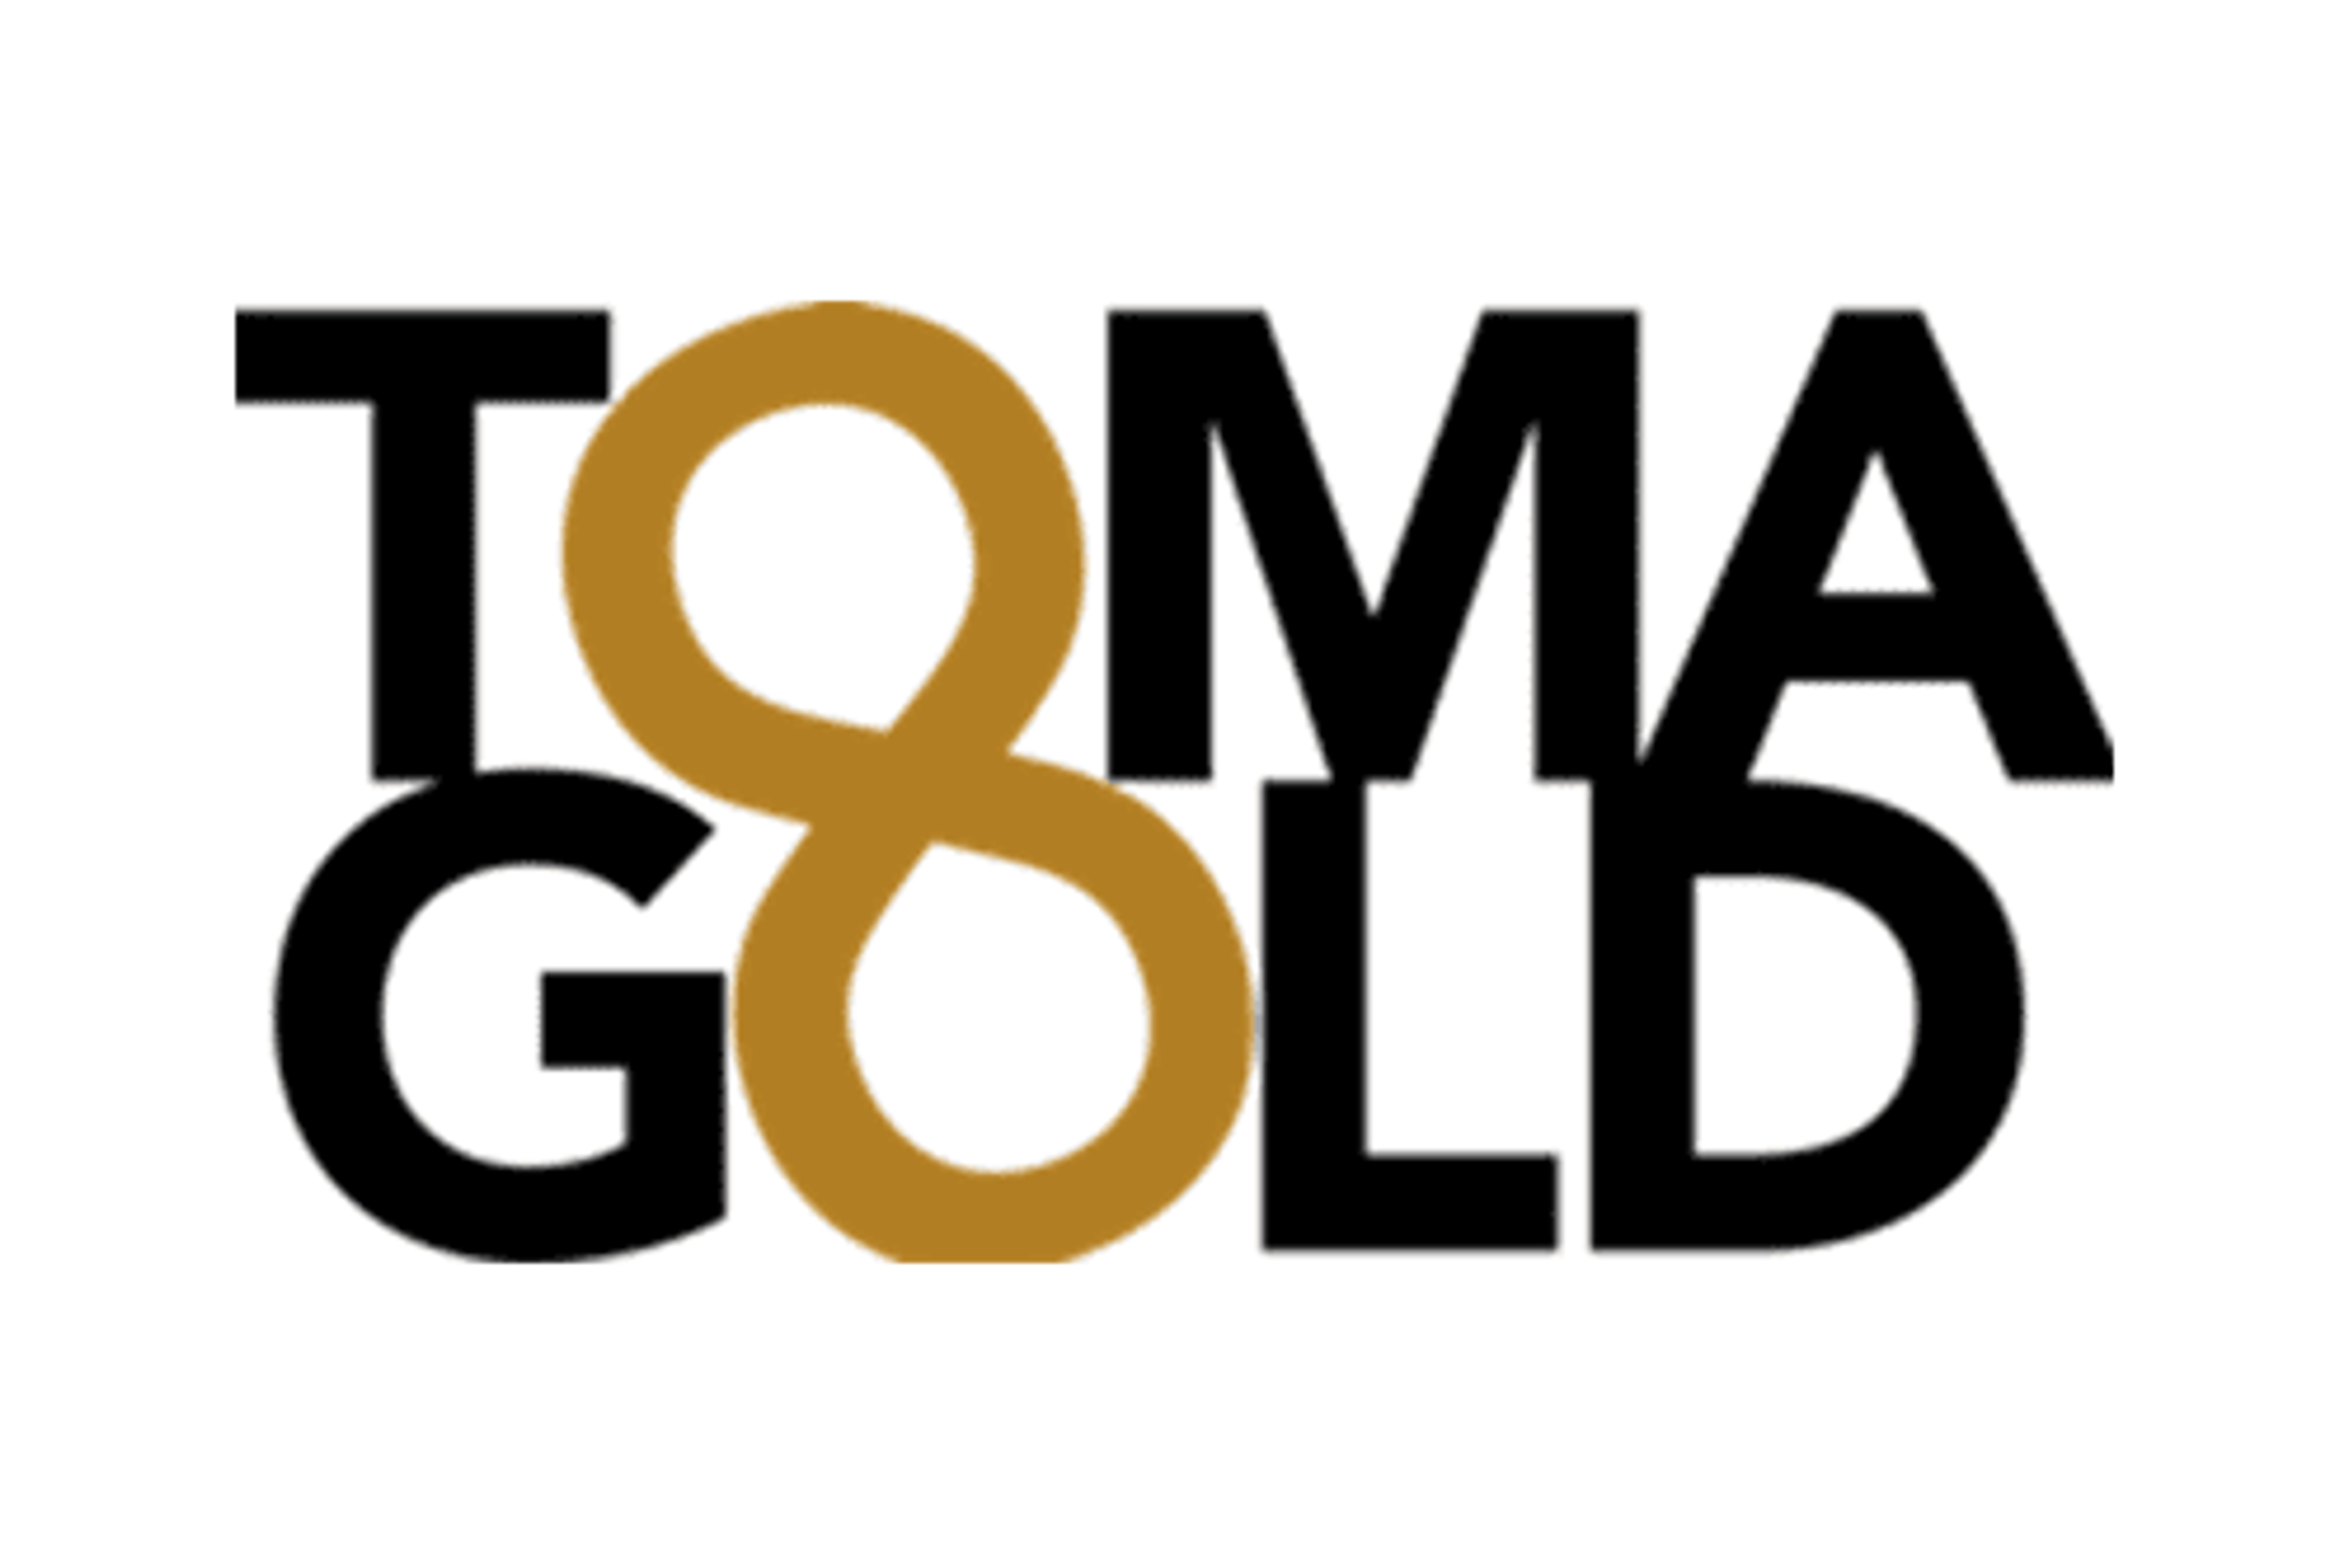 TomaGold intersects 1.83 g/t Au over 52.3 m, including 125 g/t Au over 0.5 m at a depth of 350 m at Obalski